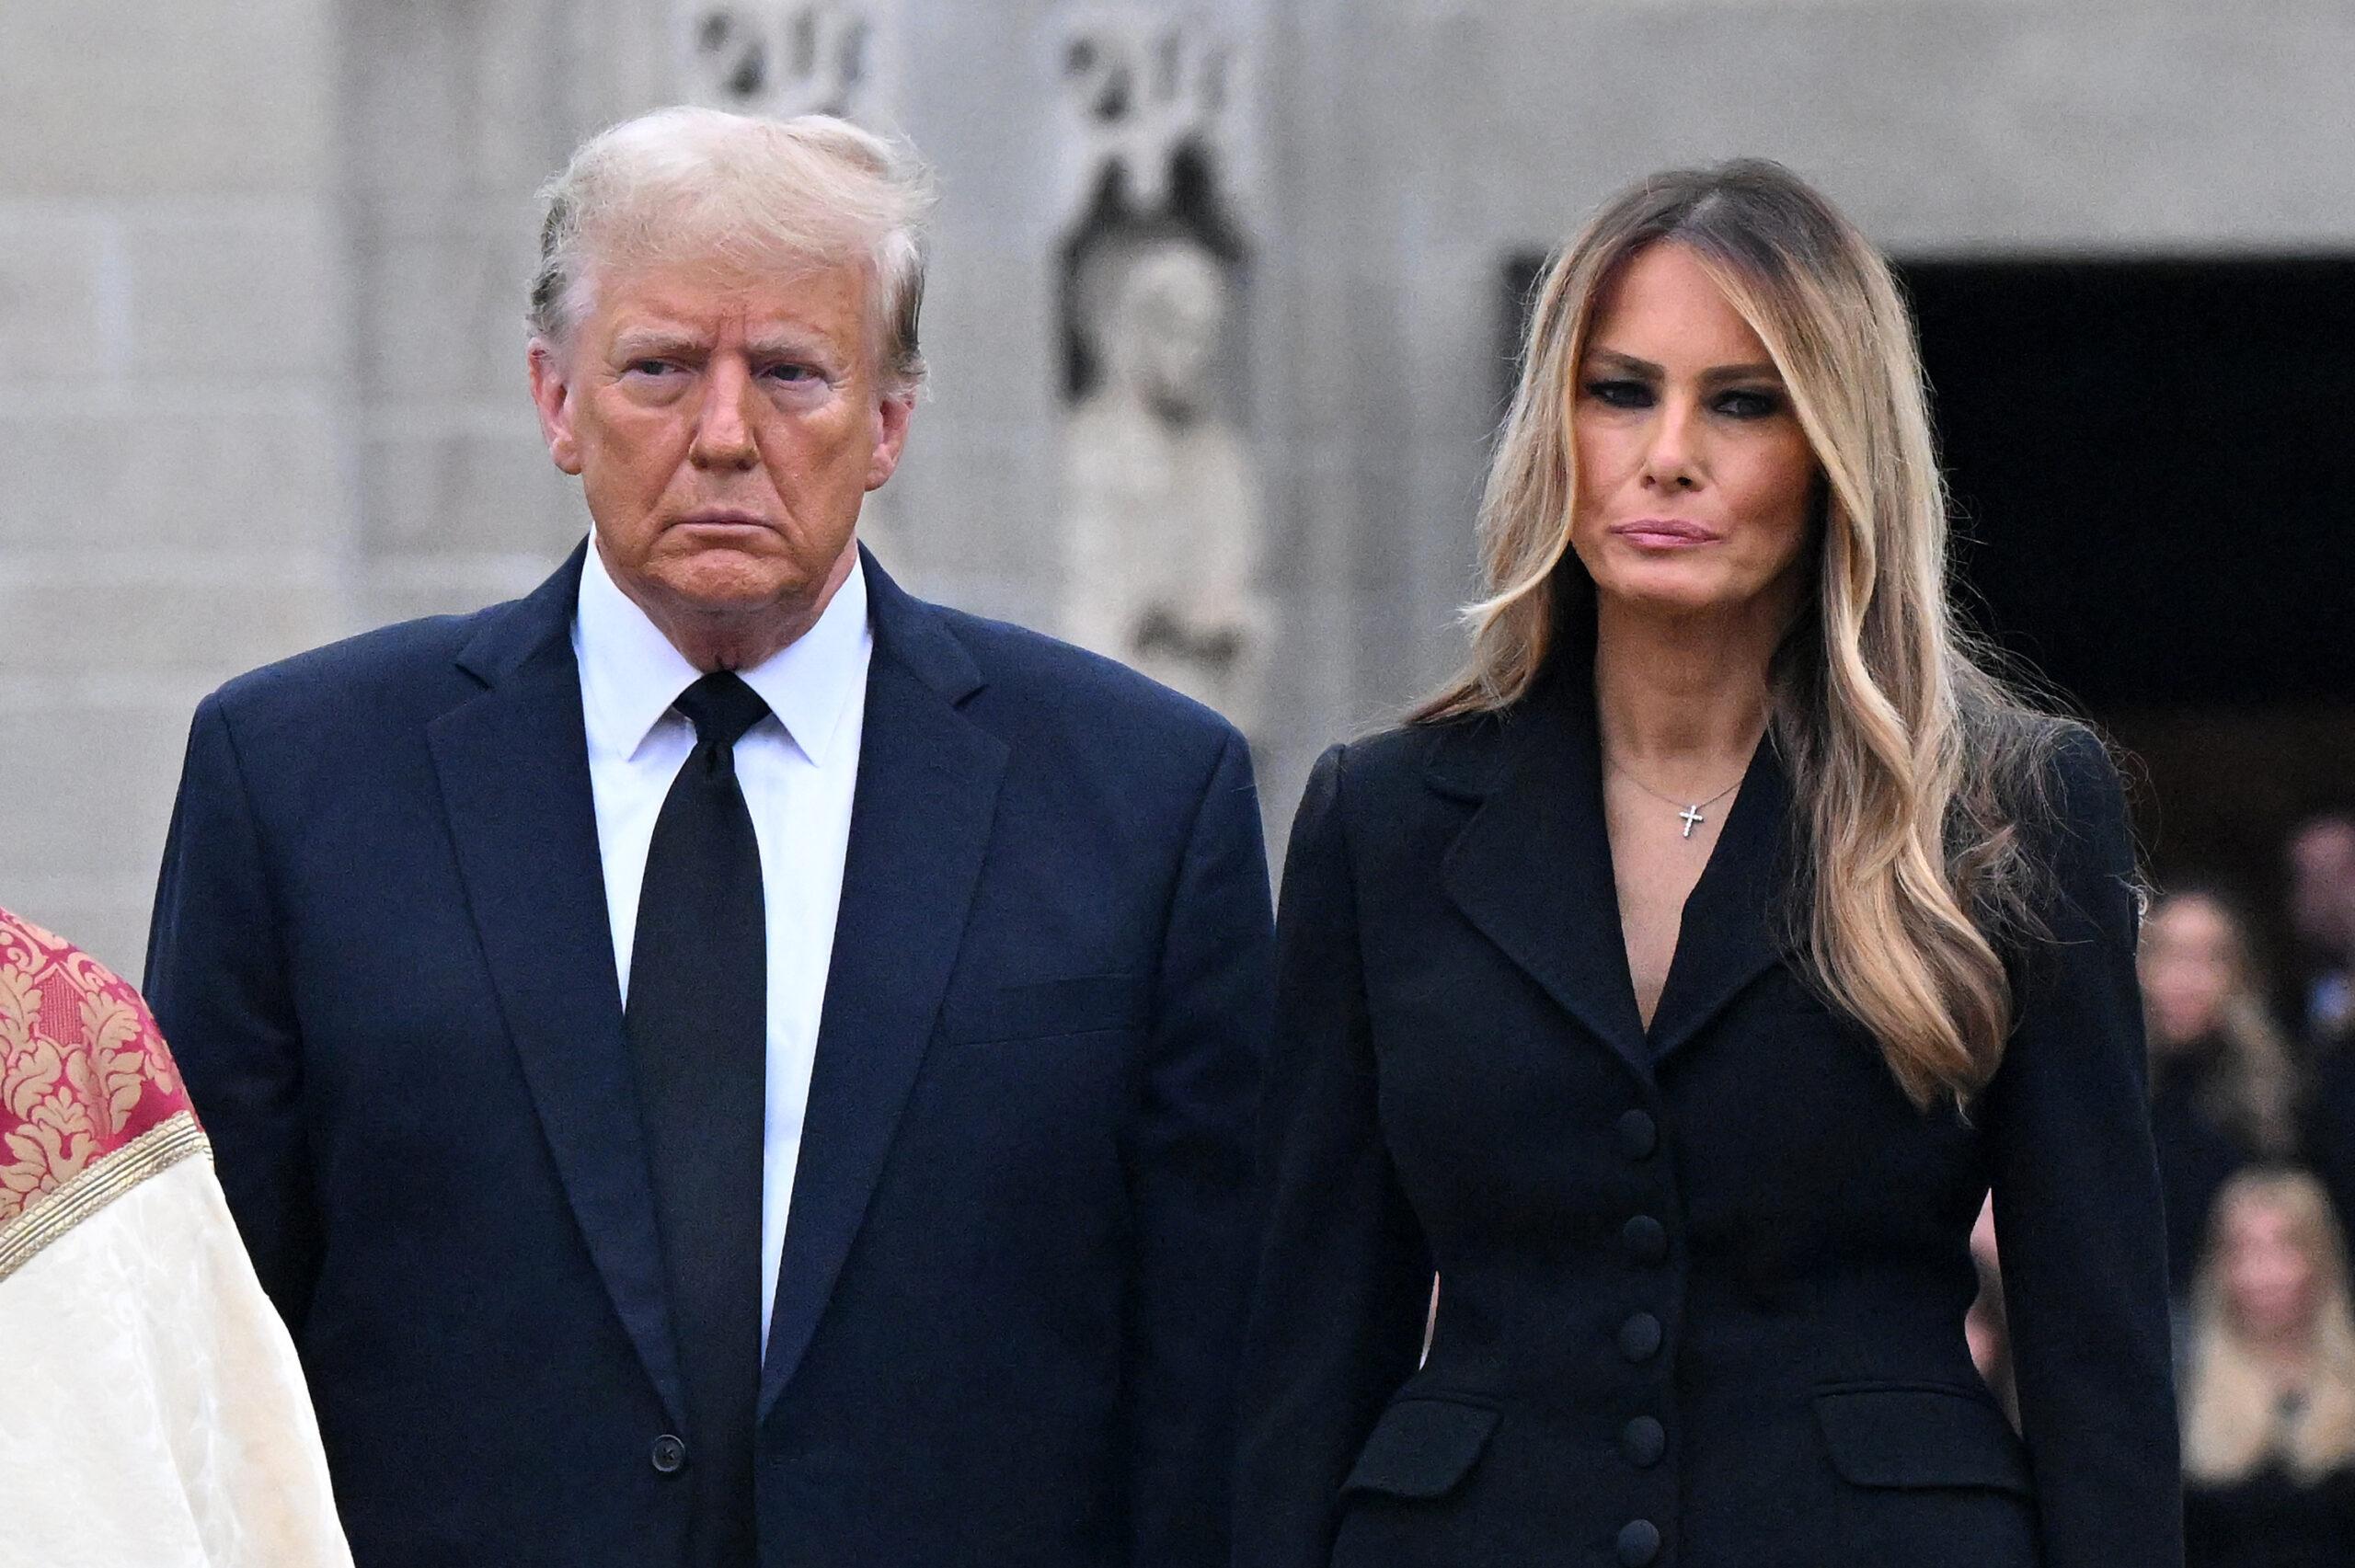 Donald Trump and Melania Trump hold hands as they depart Amalija Knavs' funeral at Bethesda-by-the-Sea Church in Palm Beach, FL.